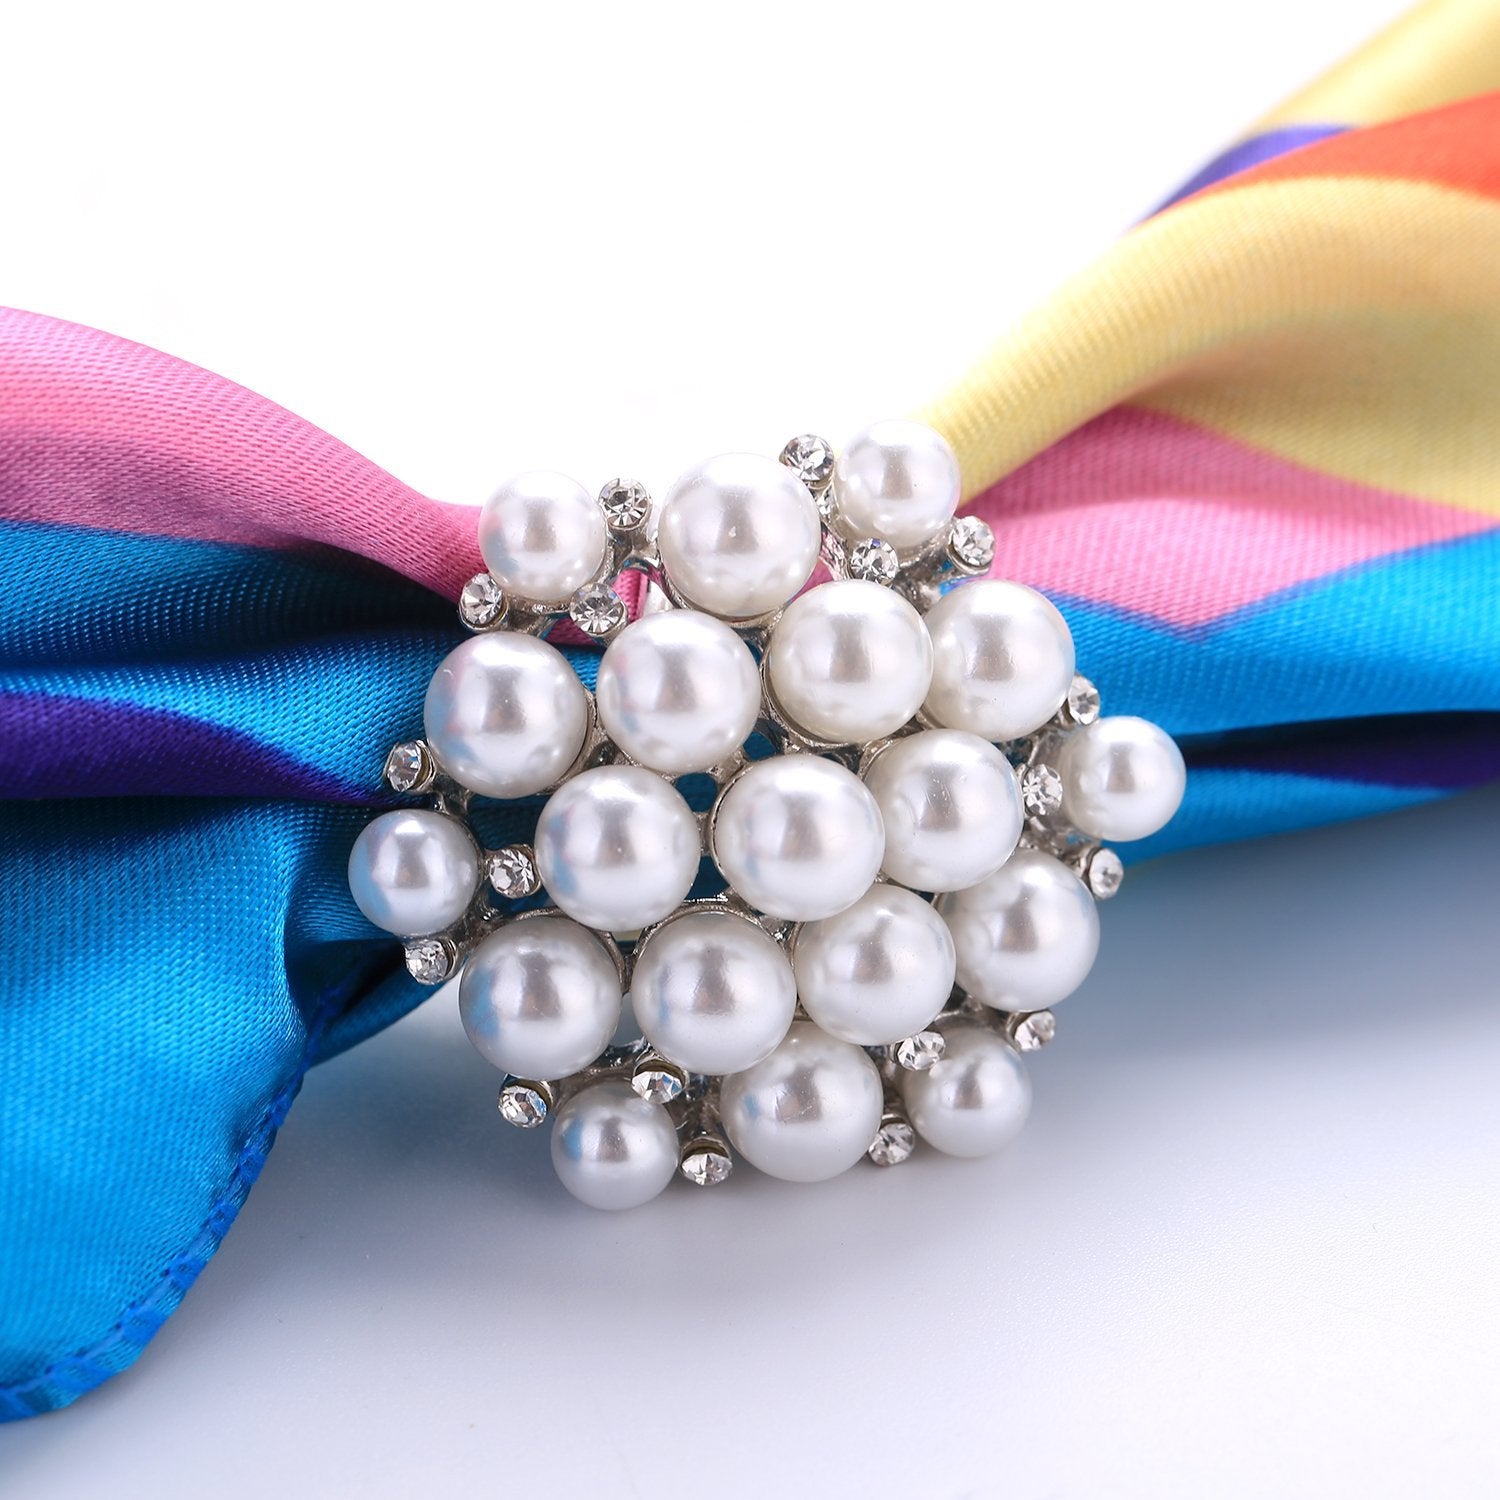 Silver Tone Scarf Ring Clip Holder With Central White Pearl 